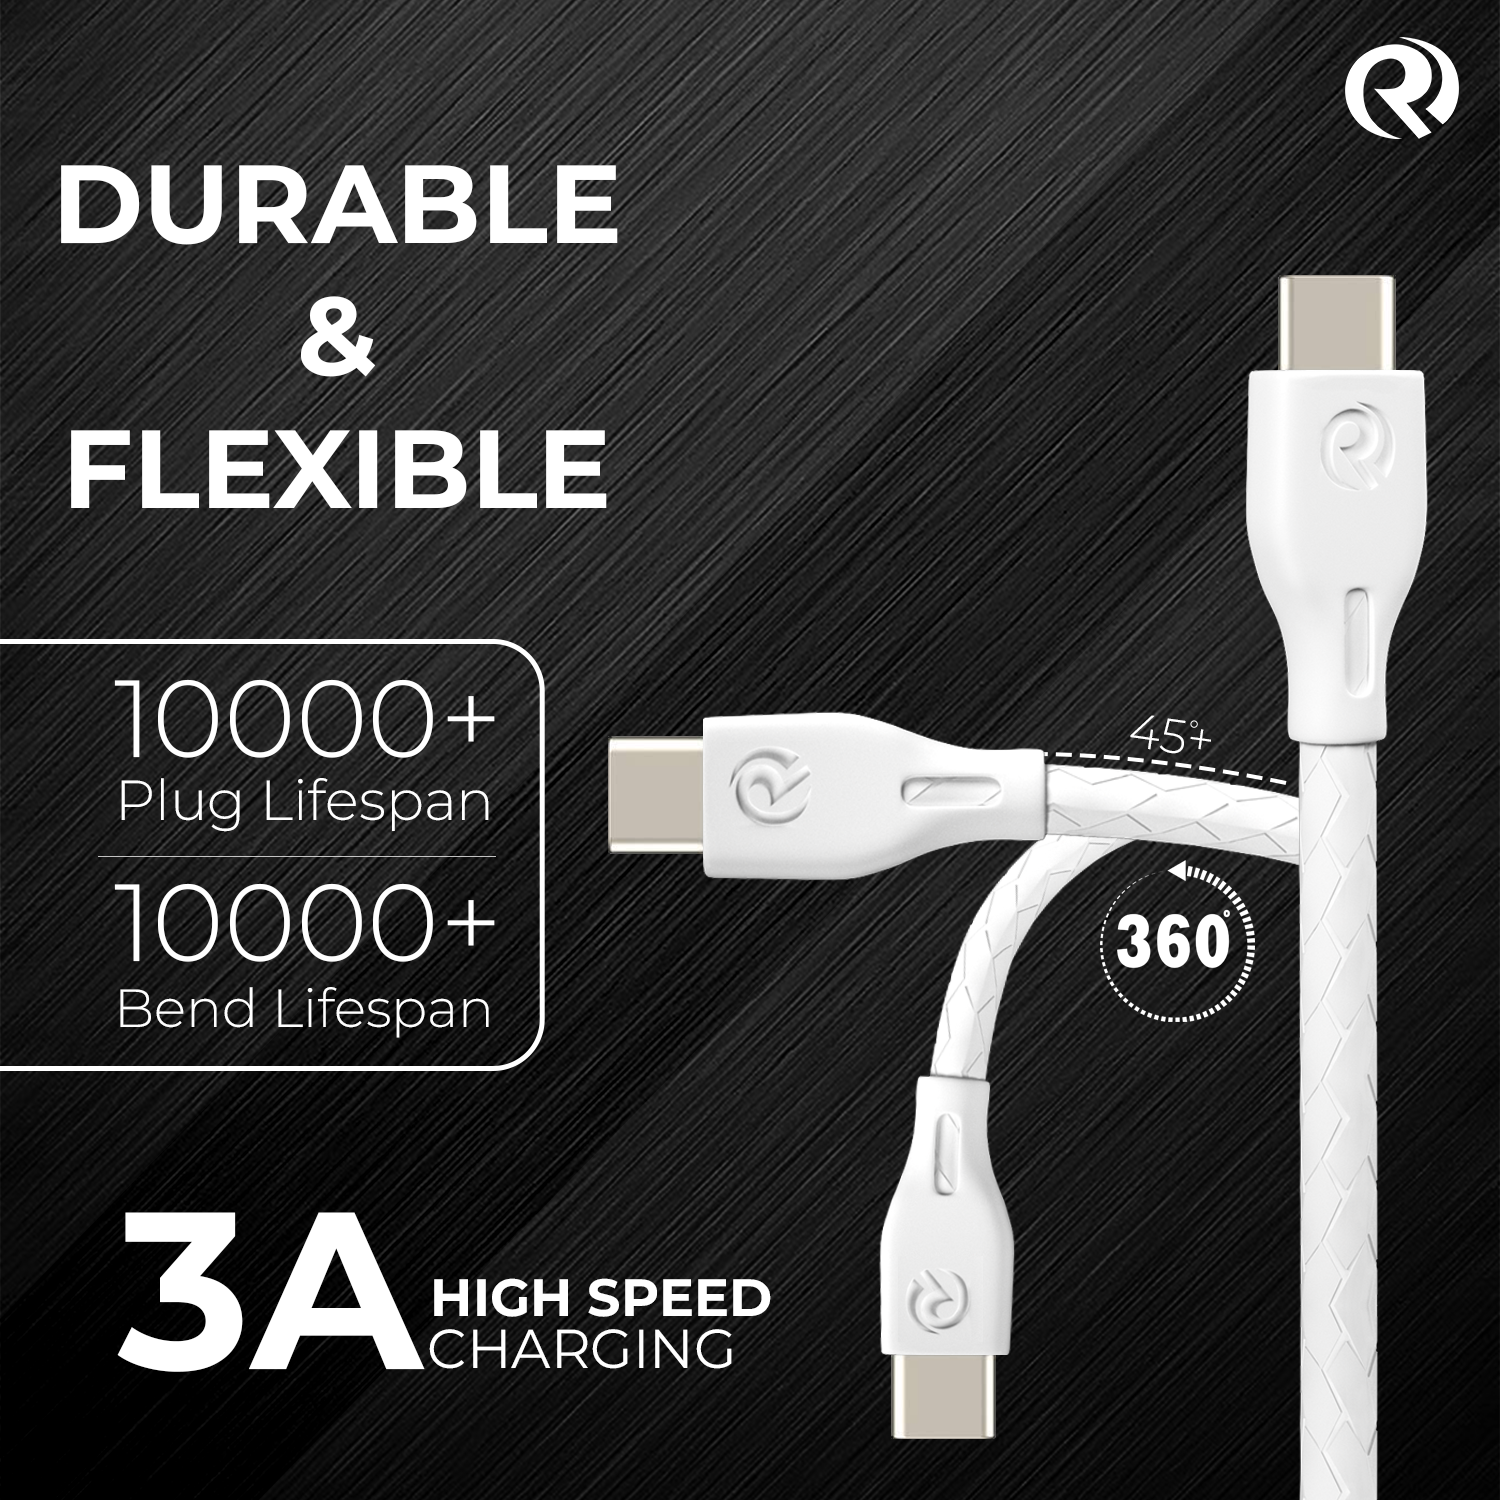 ROBOTEK DC109 USB to Type C, 3A Fast Charging Cable, 3.2 Ft (1.0M), QC 3.0, Compatible with Samsung, One Plus & all type-C devices, Seamless Data Transmission, White (3 Amp, 1 M, White)(USB TO TYPE-C)